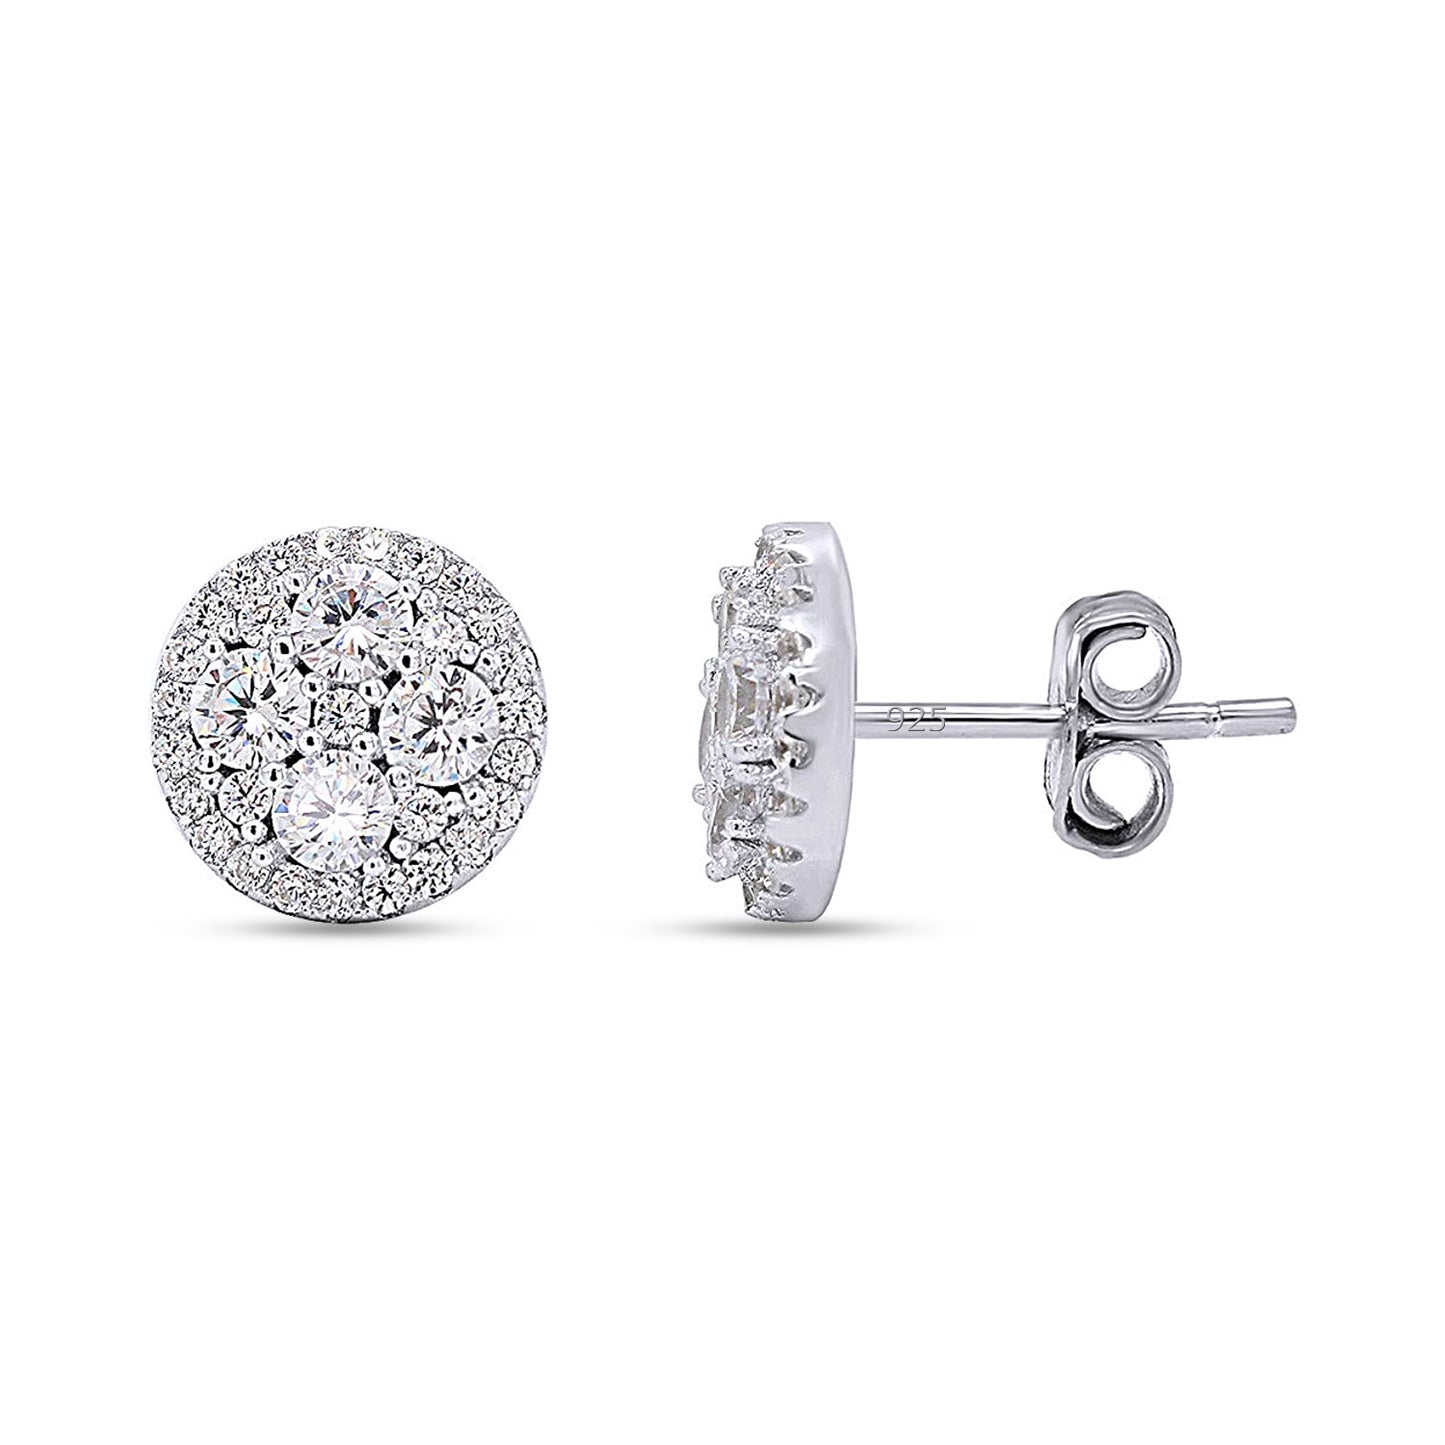 Load image into Gallery viewer, Halo Cluster Cubic Zirconia Stud Earrings for Women in 925 Sterling Silver
